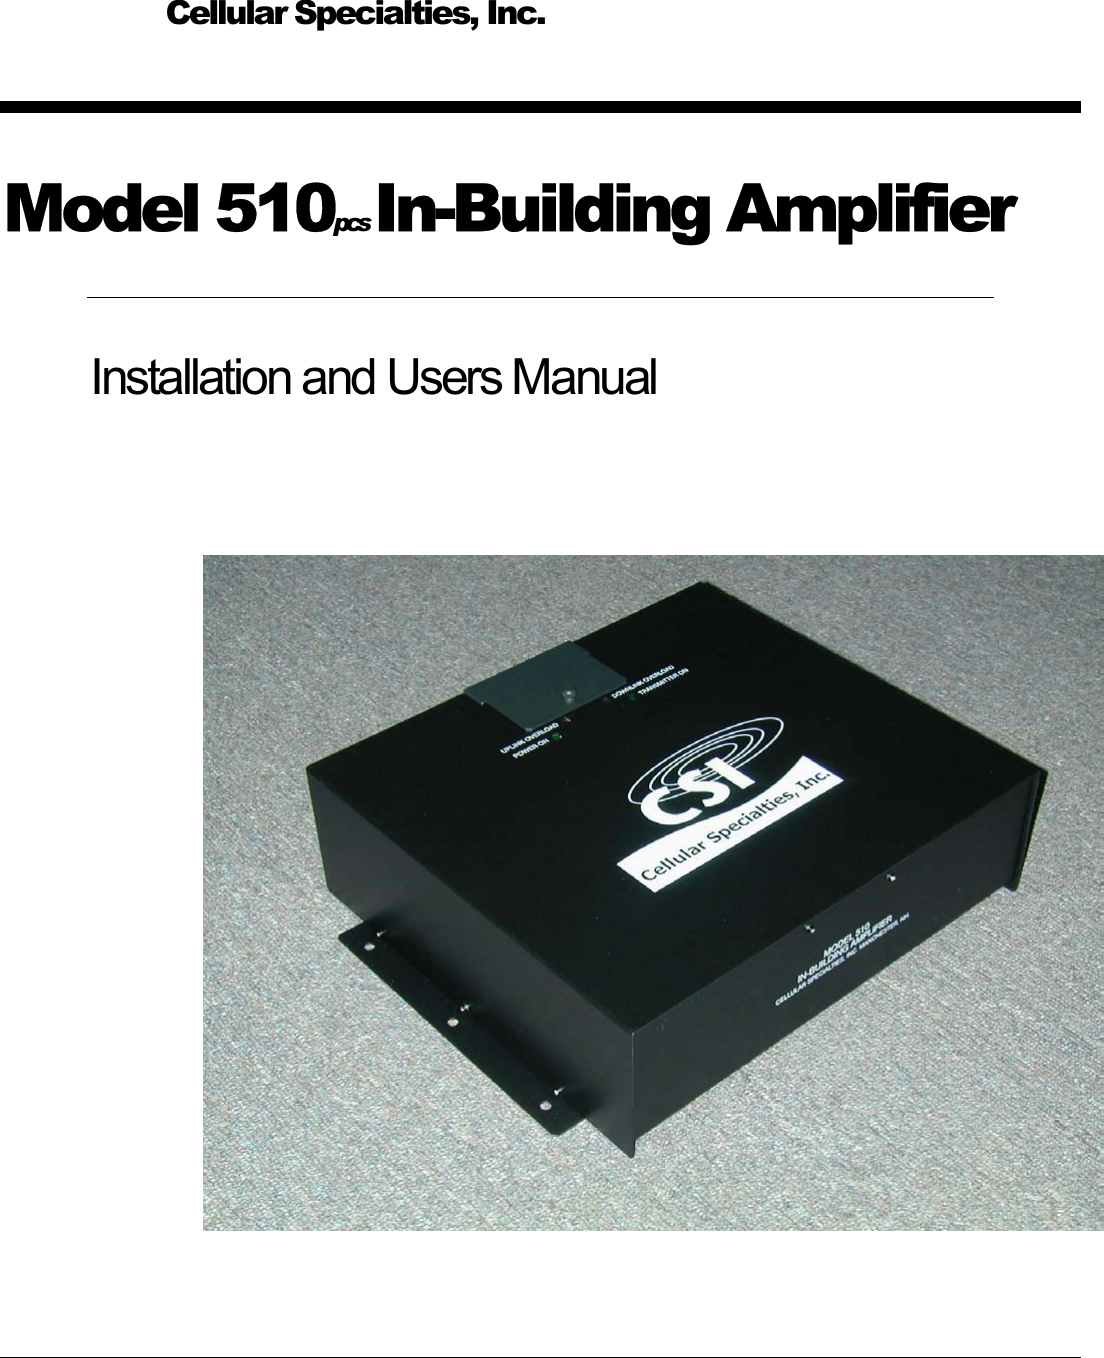   Cellular Specialties, Inc.  Model 510pcs  In-Building Amplifier Installation and Users Manual         